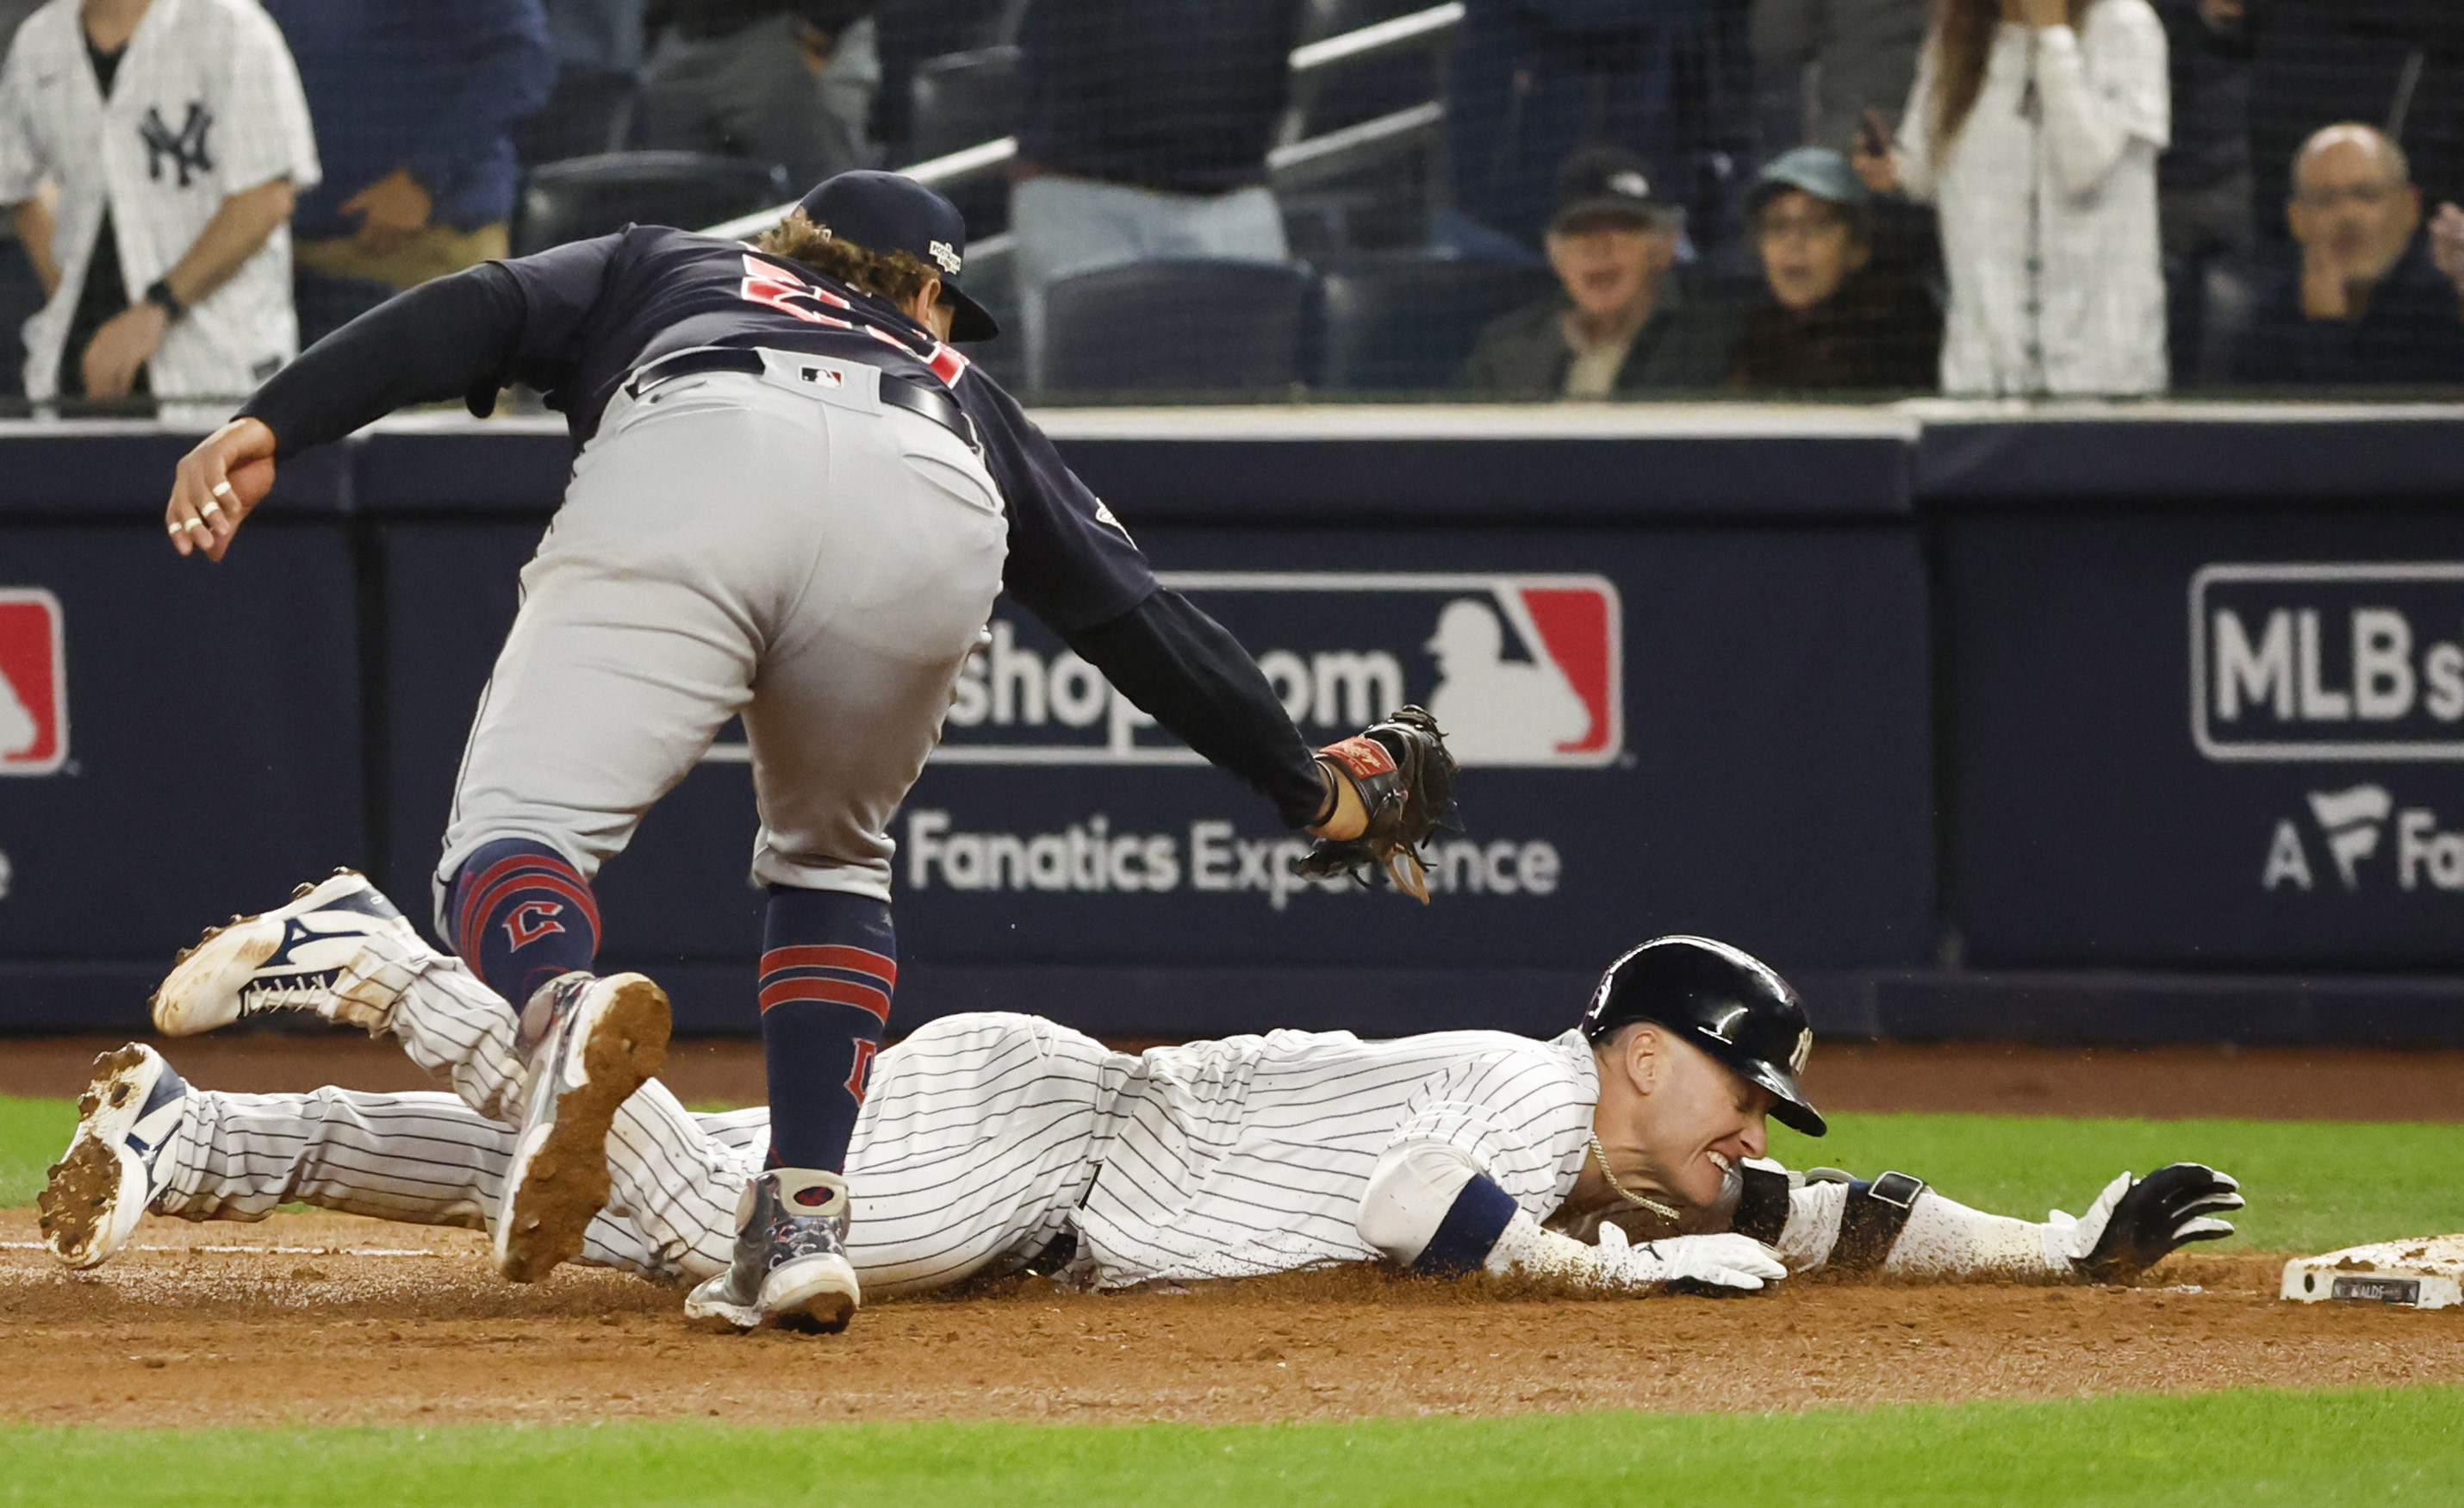 Yankees' Josh Donaldson thought he had a home run vs. Guardians, ended up  tagged out instead